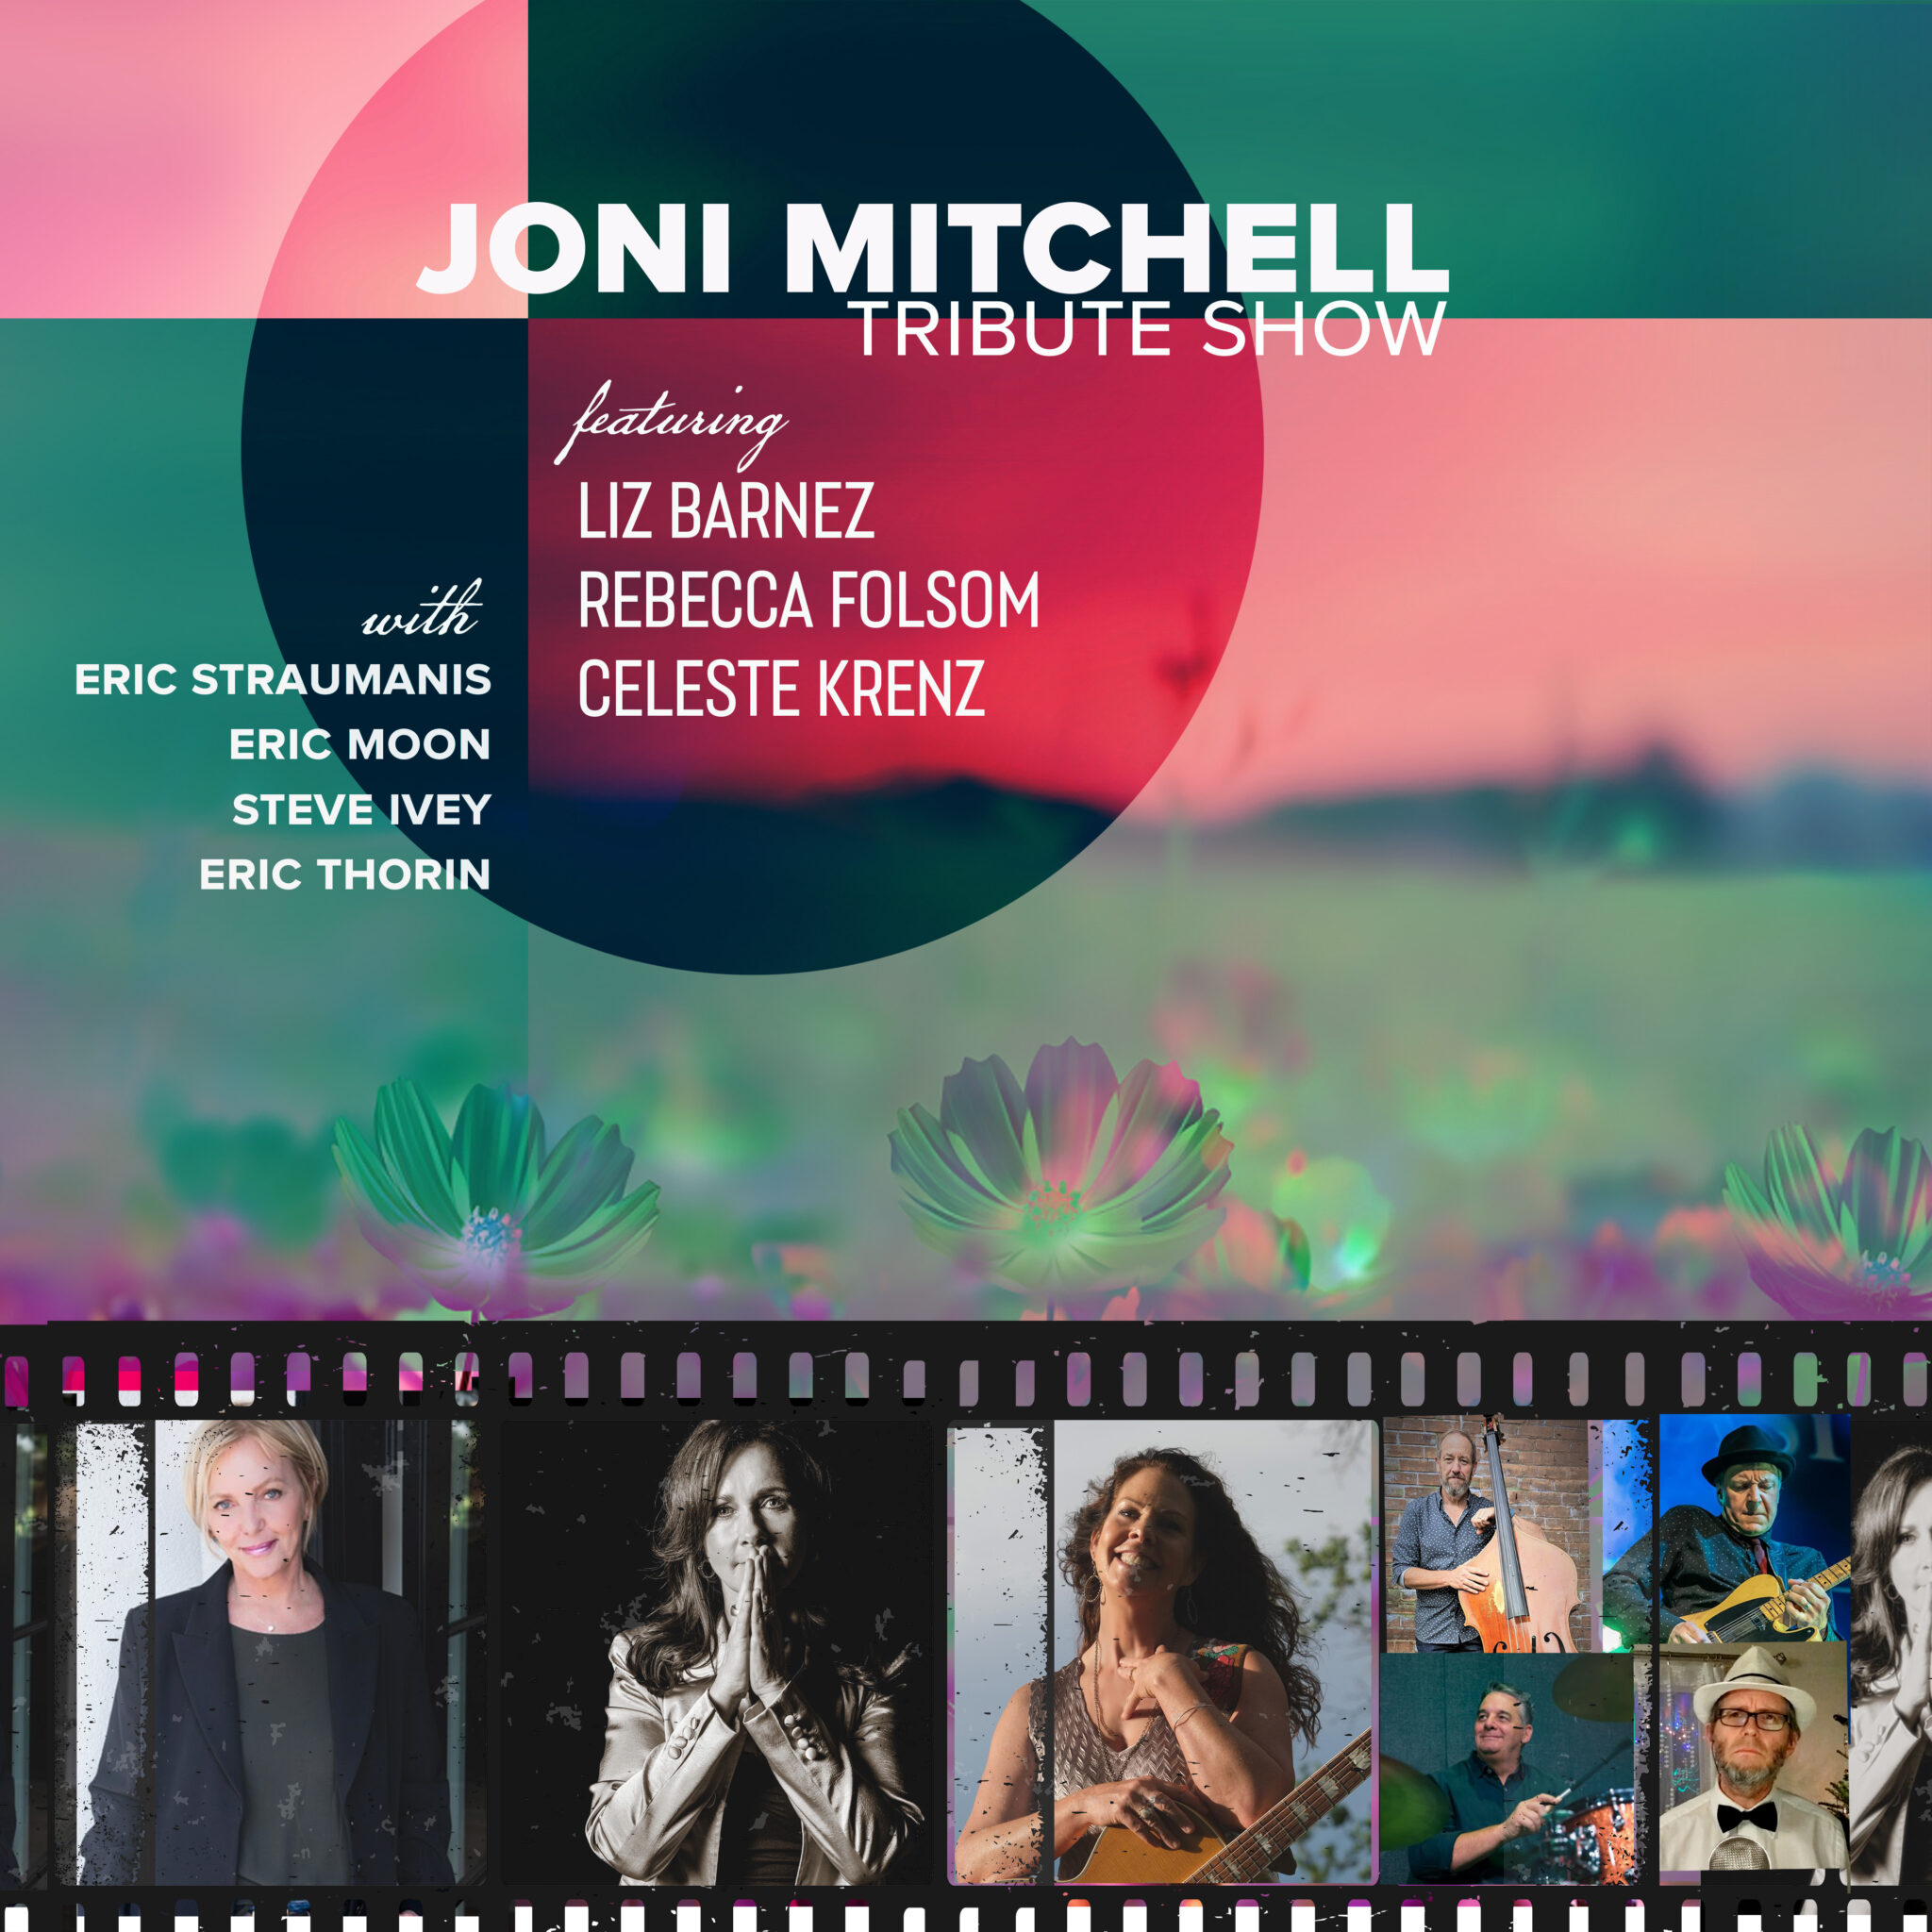 [SOLD OUT] A Joni Mitchell Tribute Concert